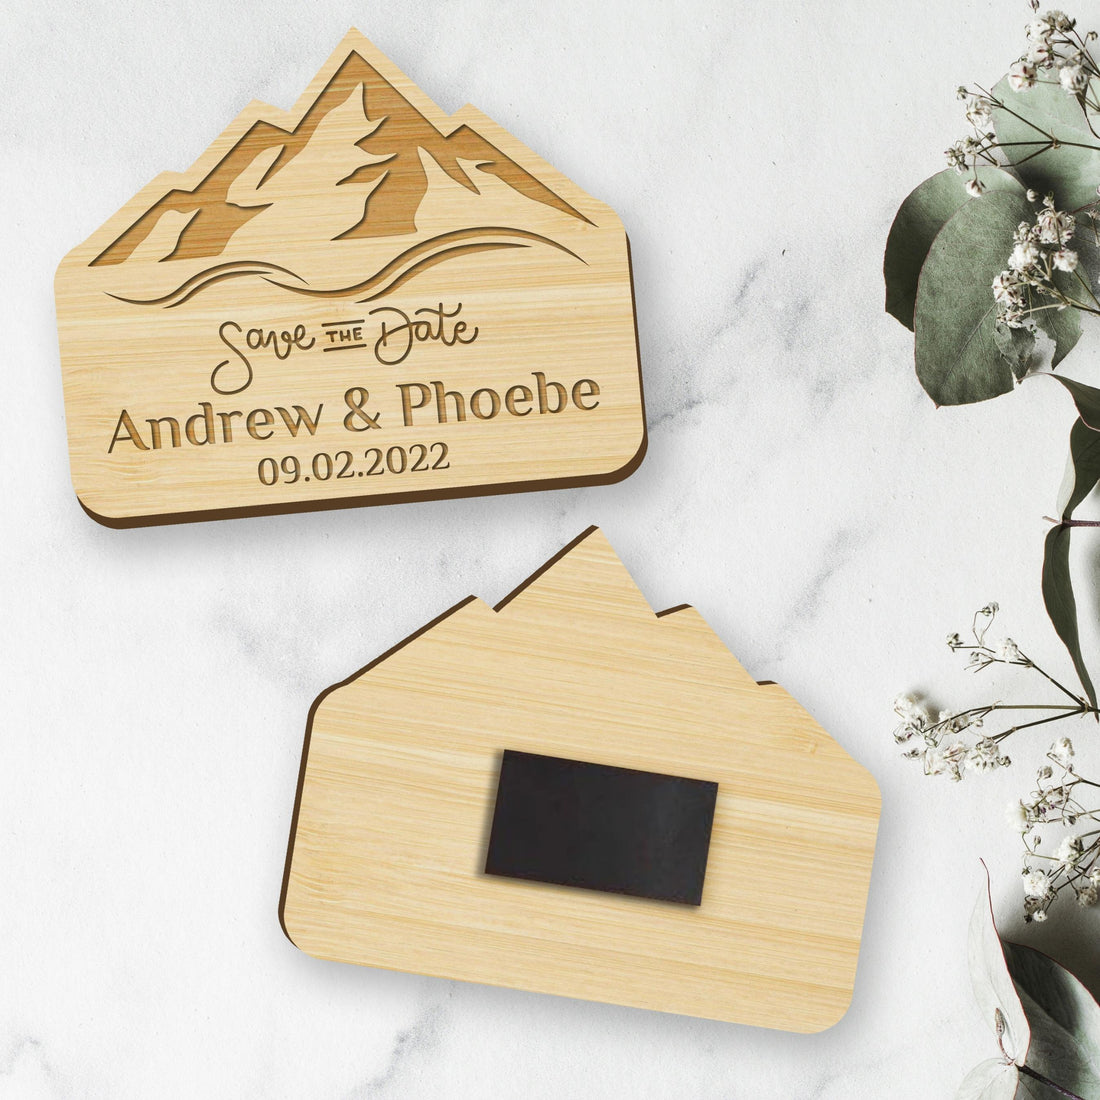 Engraved Wooden/ Acrylic Save The Date Adventure Mountain Fridge Magnets, Personalised Rustic Vintage Magnet Invitation Card, Custom Wedding Favours, Remember Date Announcement Guest Gift Tags